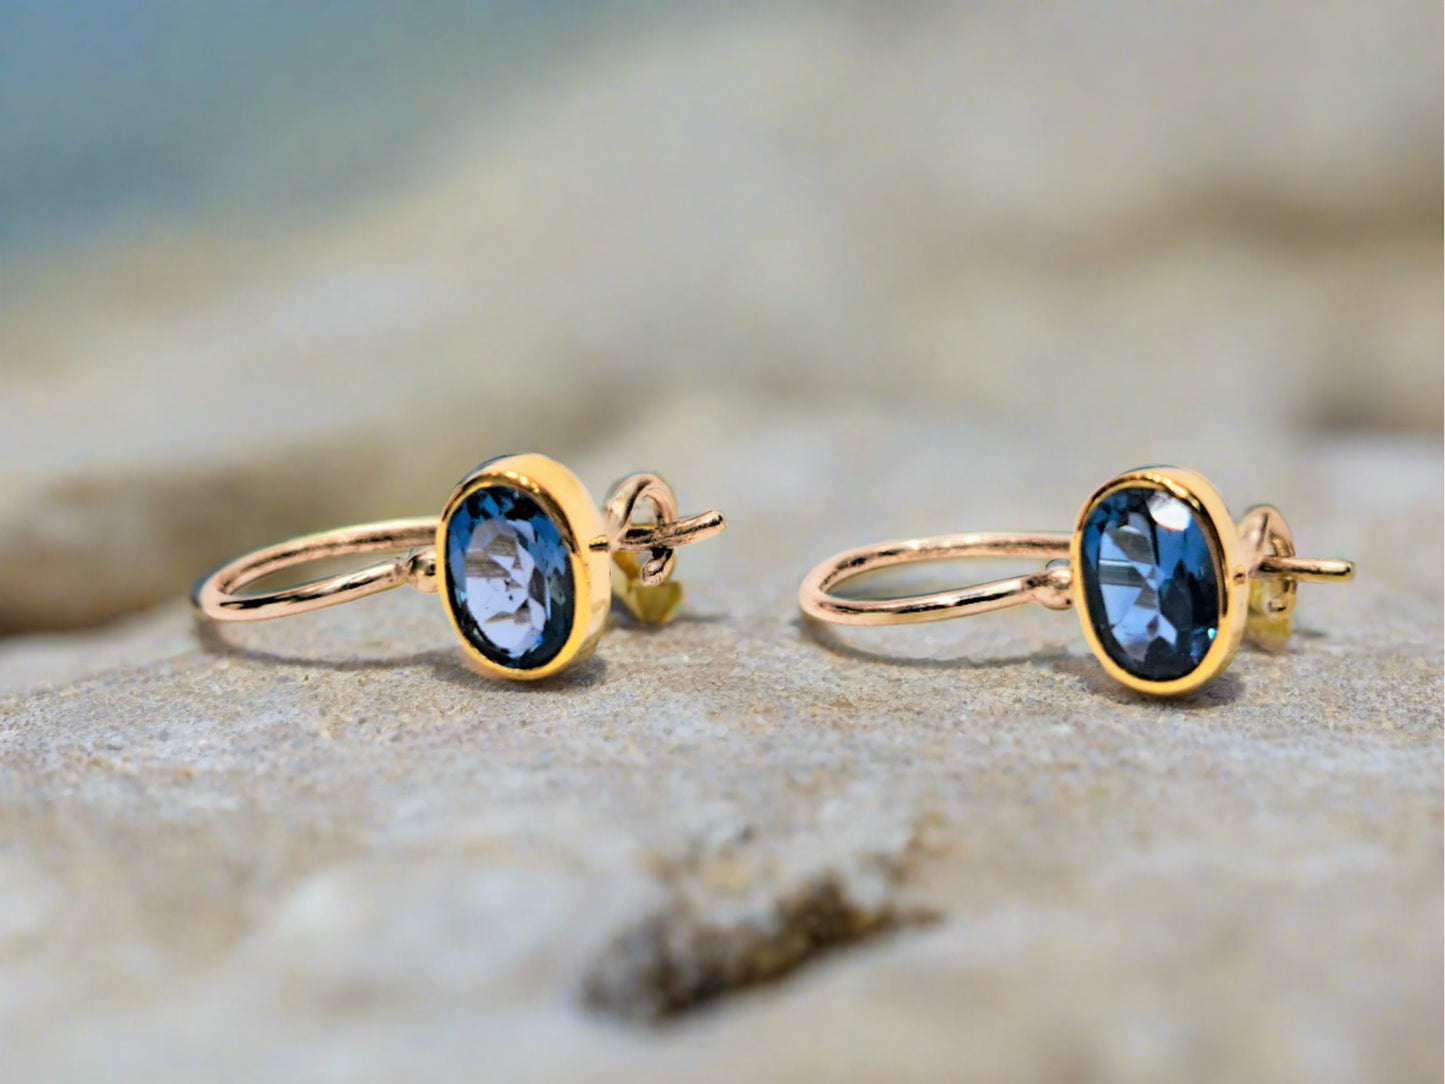 Handmade earrings with 18K gold and silver with aquamarines